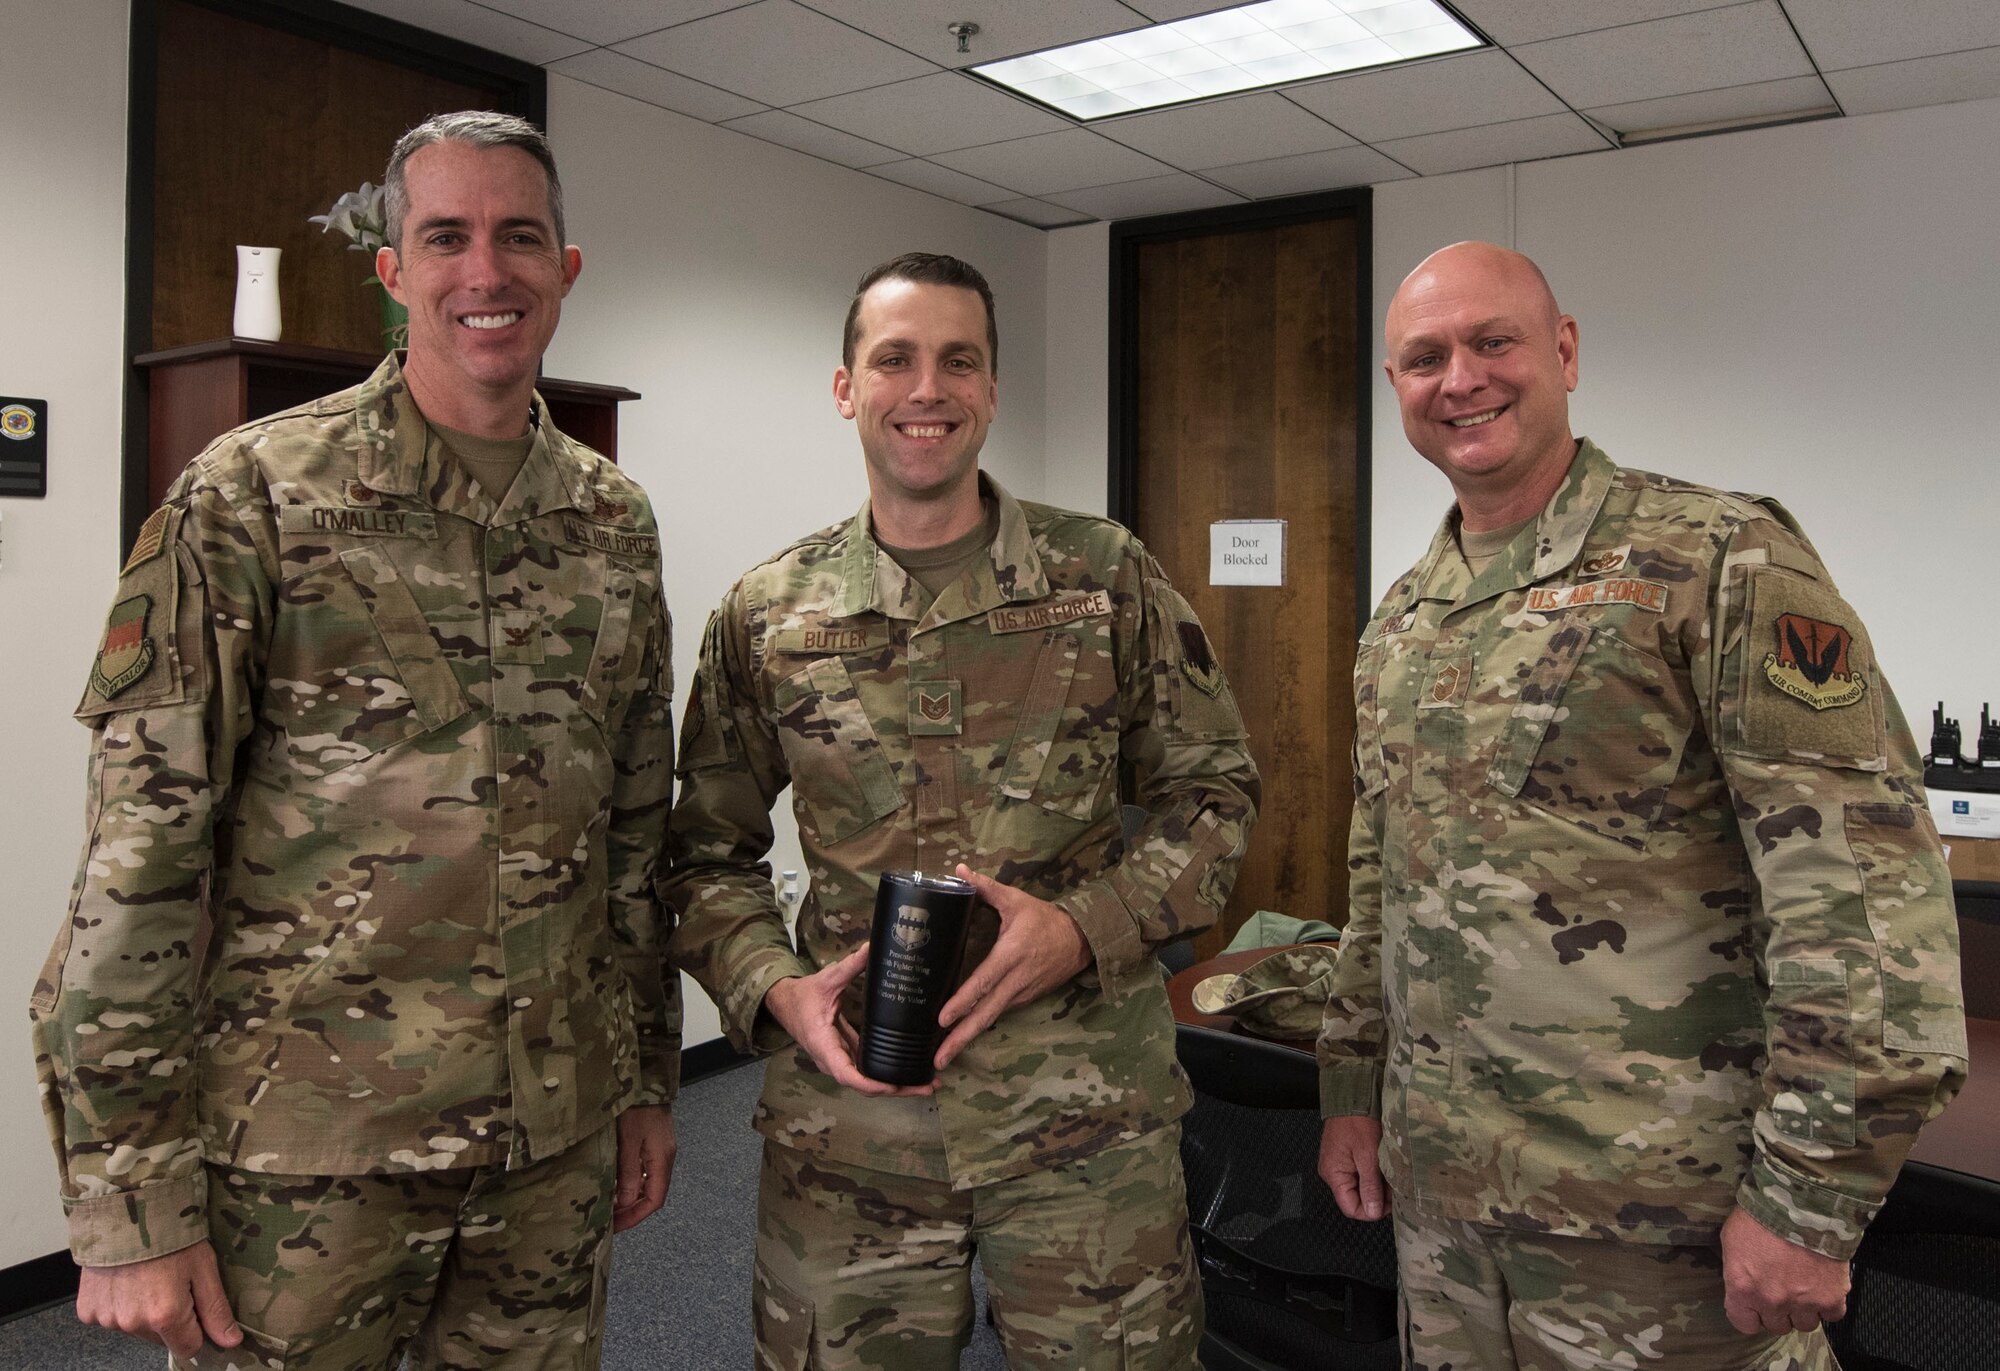 Tech. Sgt. Ryan Butler, 20th Fighter Wing Equal Opportunity noncommissioned officer in charge of equal opportunity, was recognized as this week’s Weasel of the Week (WOW) at Shaw Air Force Base, South Carolina, Nov. 14, 2019.